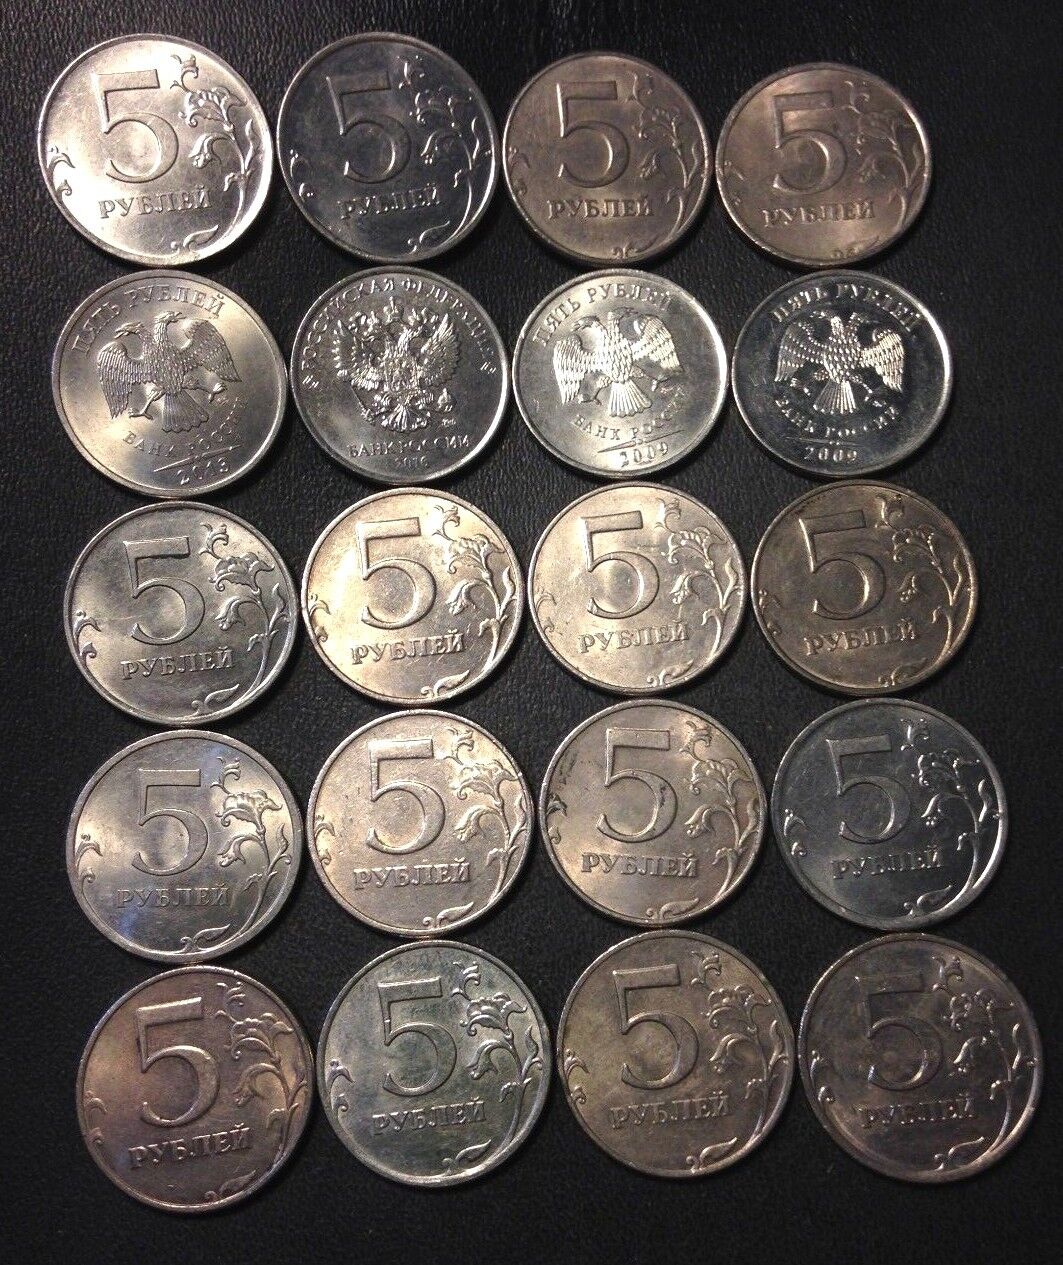 Old Russian Federation Coin Lot - 5 Rubles - 20 High Grade Coins - 